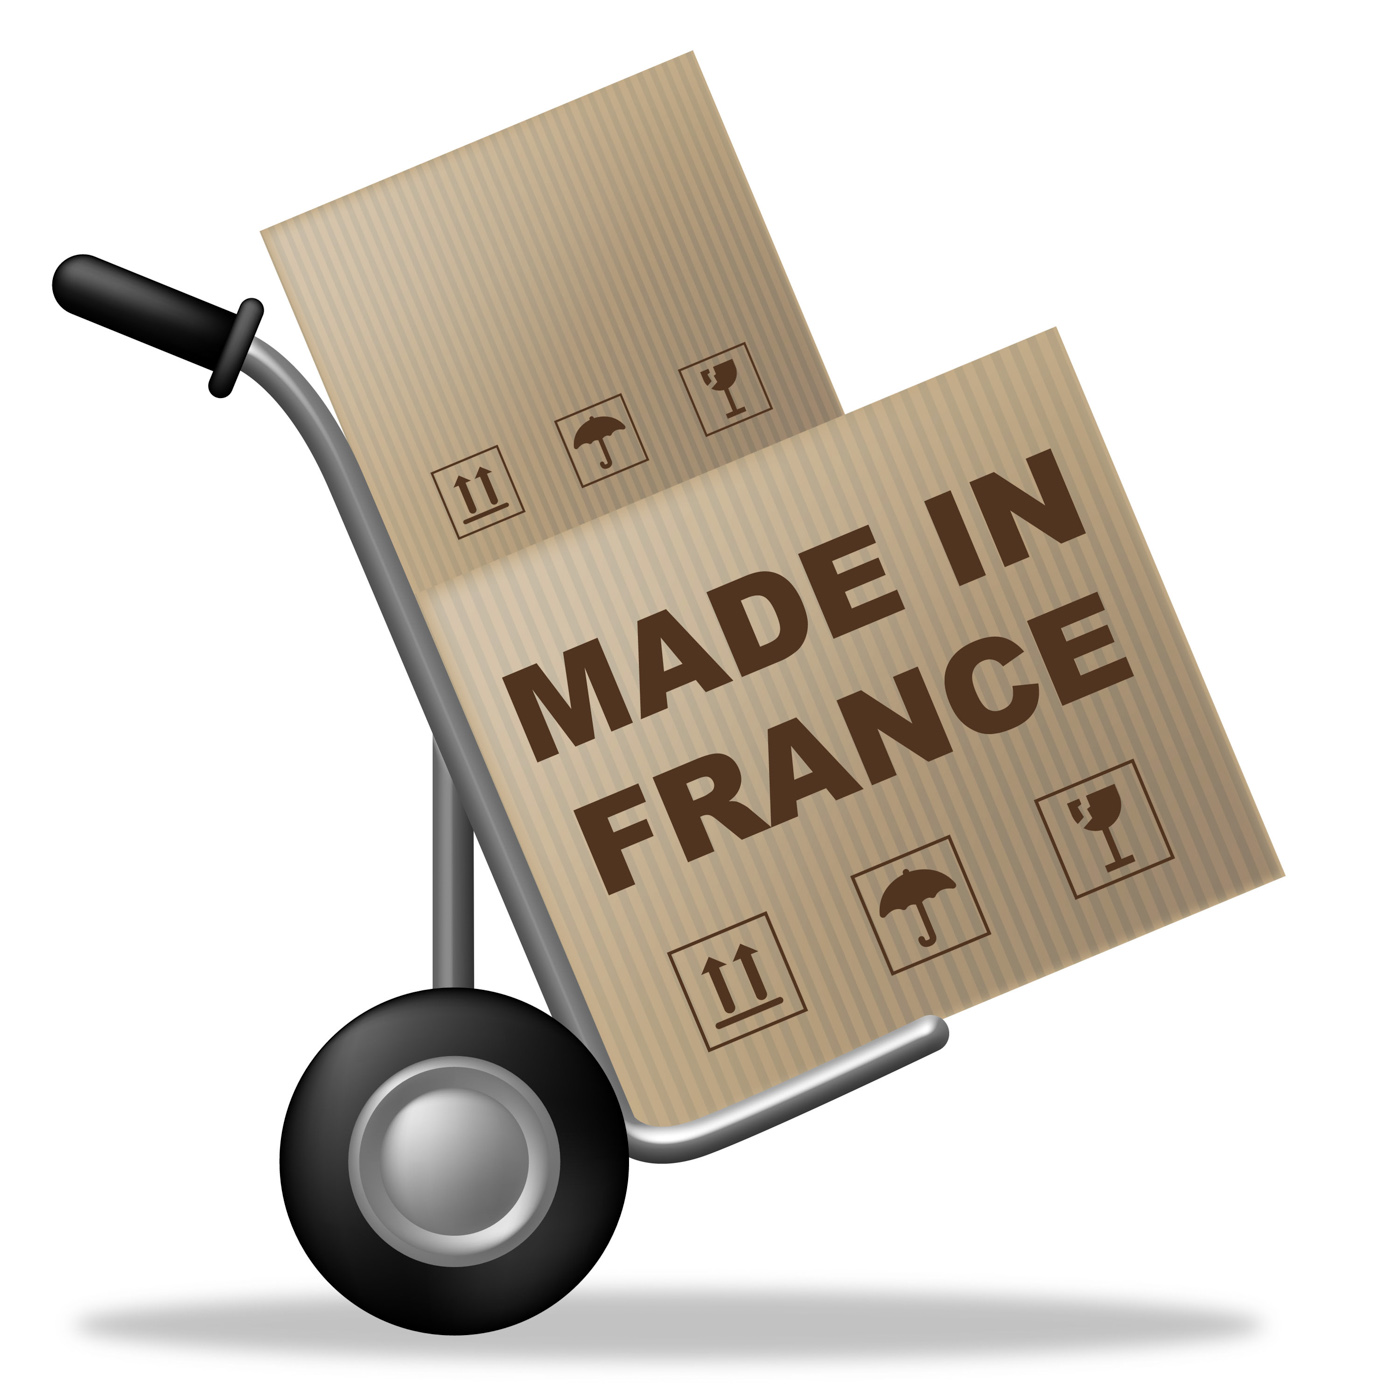 Made in france shows shipping box and cardboard photo